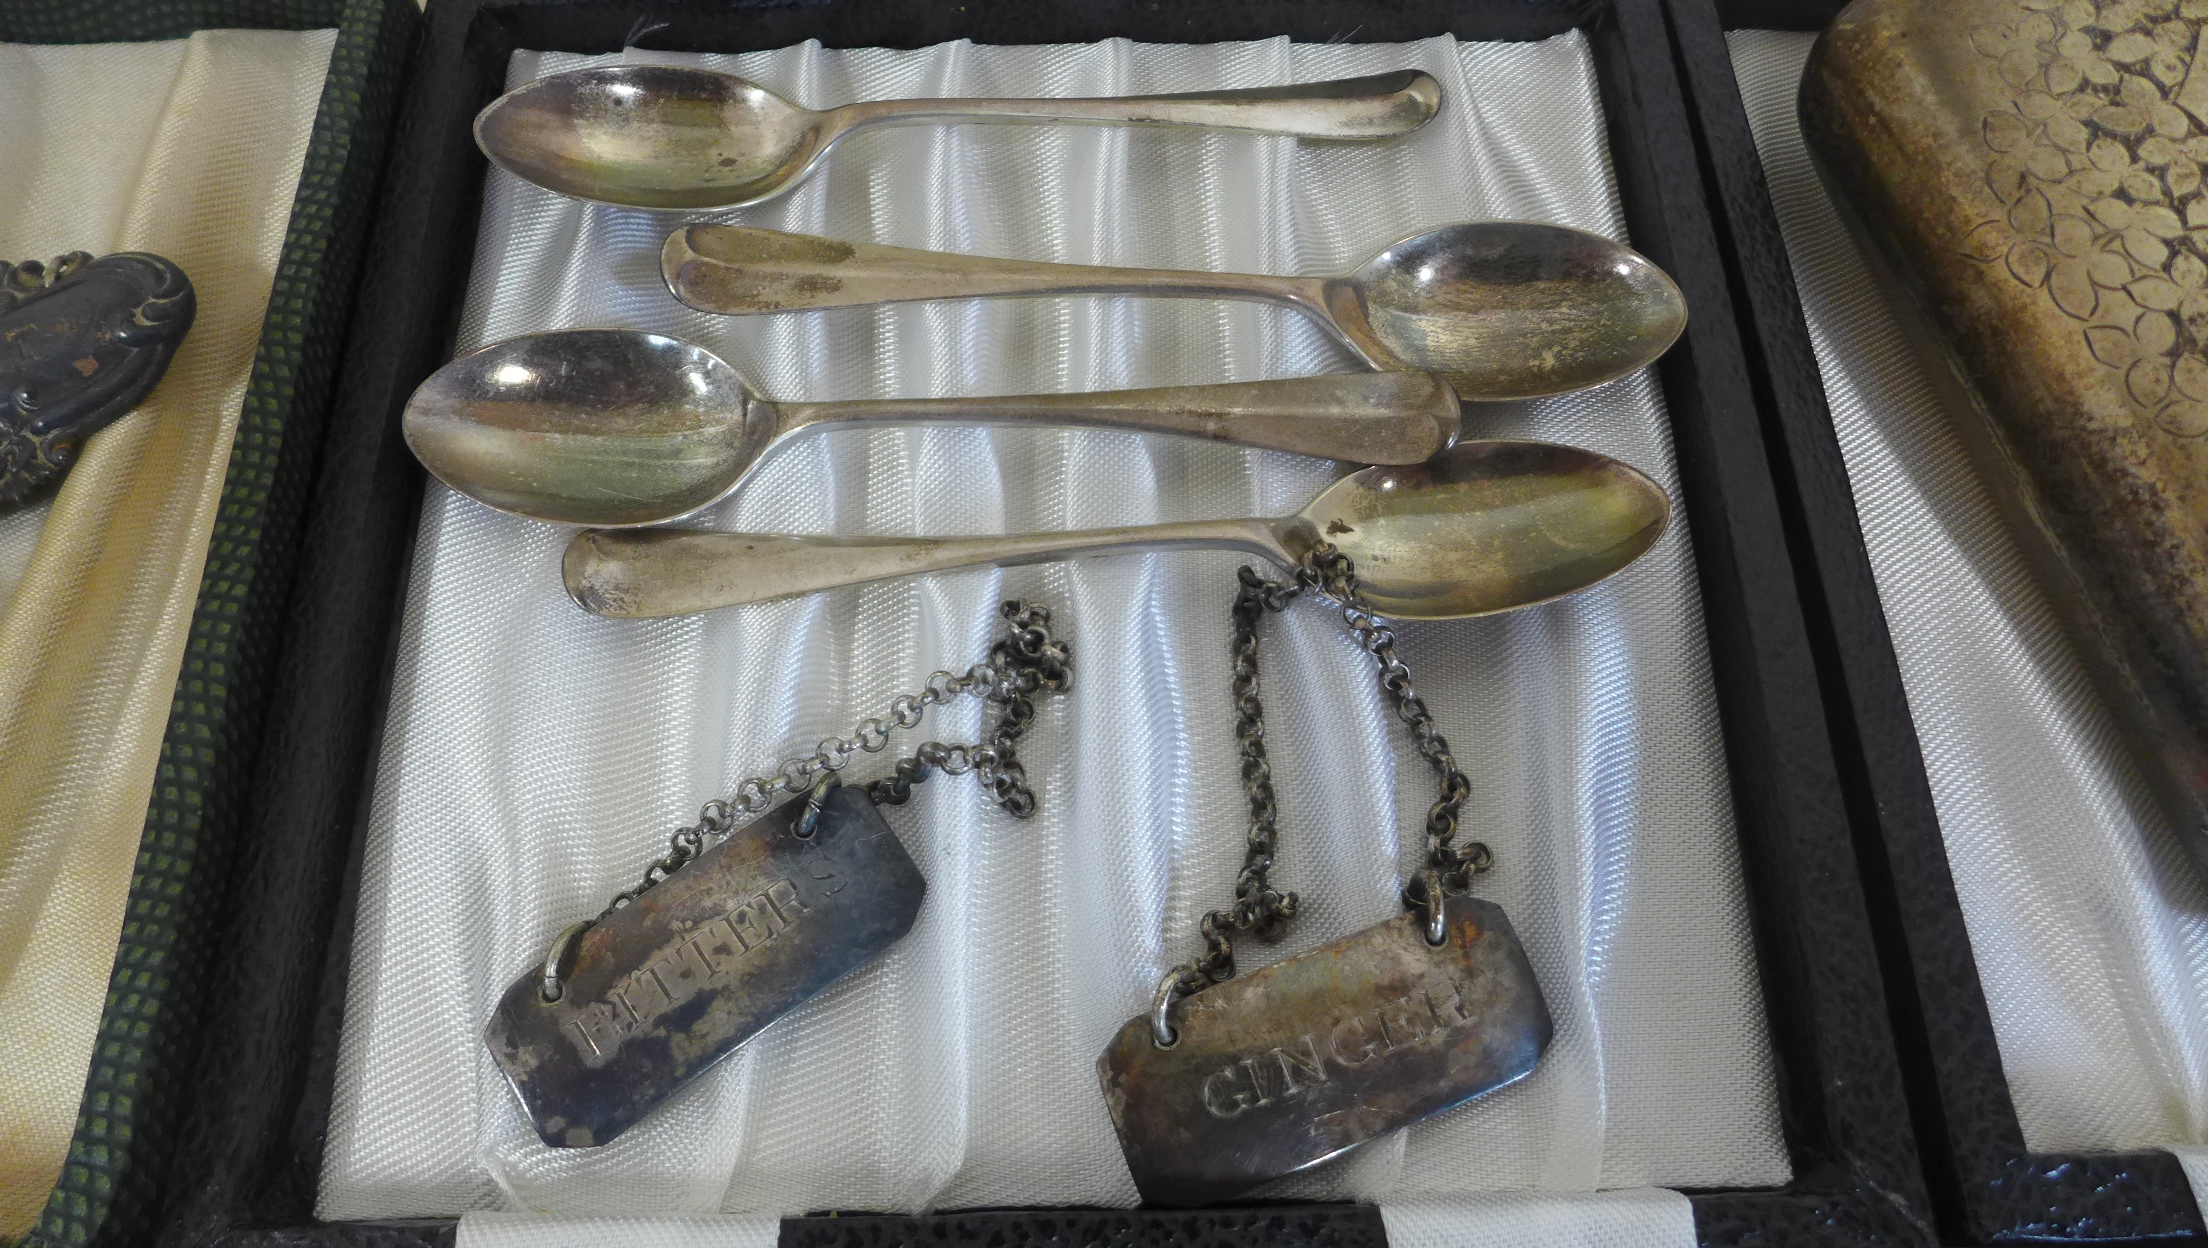 A small collection of silver and plate to include silver spoons, silver hip flask - split, gold - Image 3 of 6